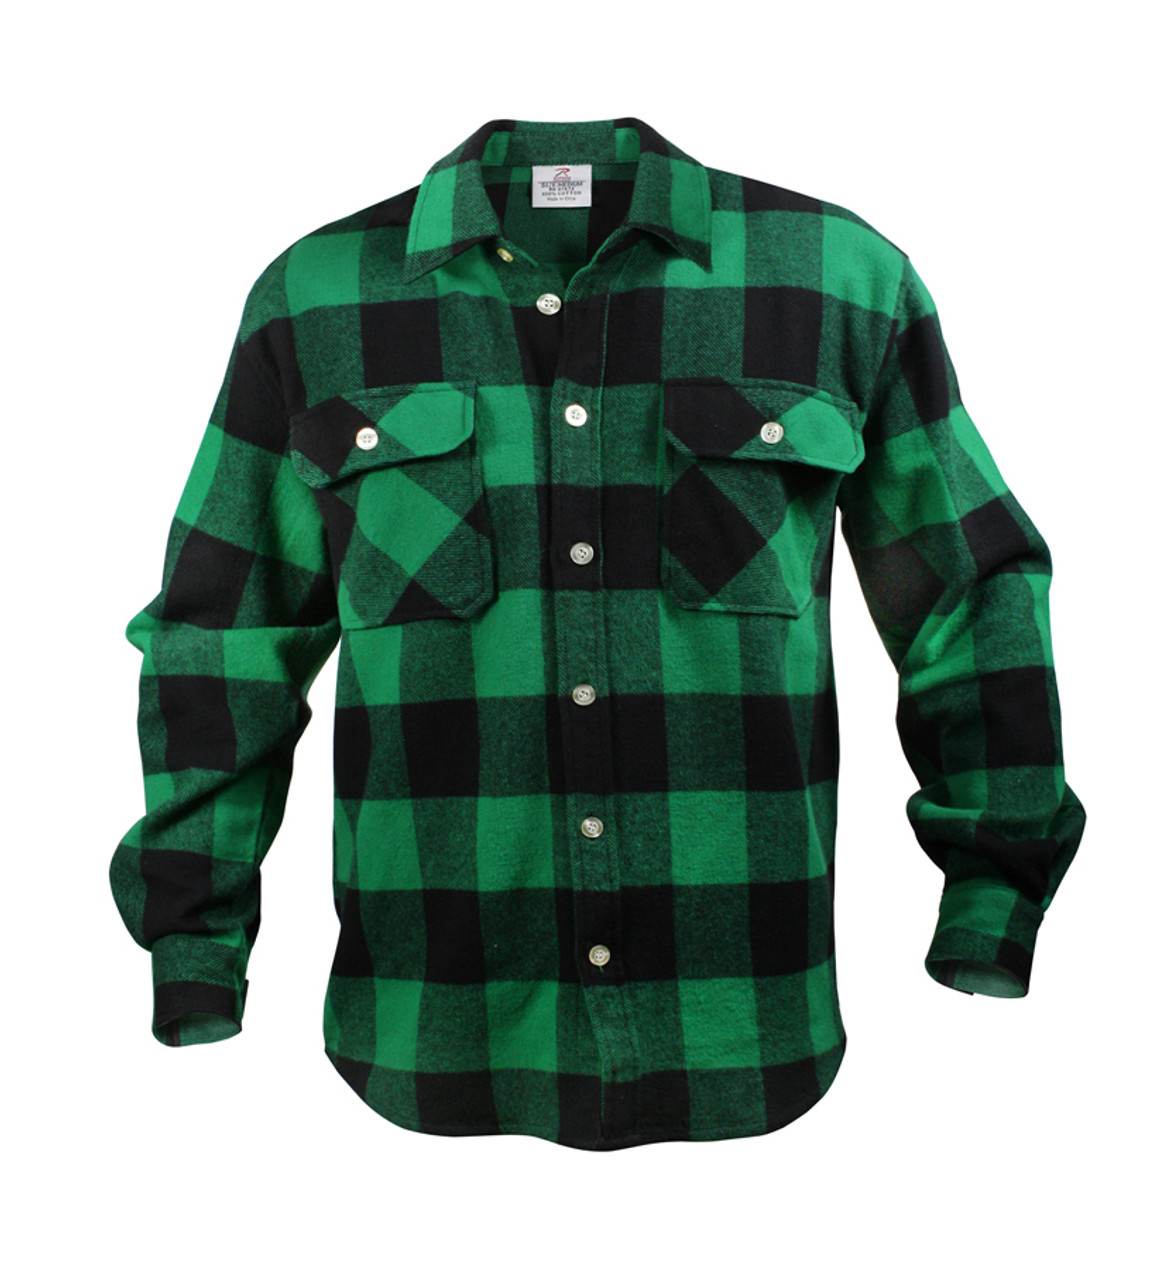 Jess Oversized Plaid Flannel Shirt in White/Green Plaid | Size Medium/Large | 100% Cotton | American Threads